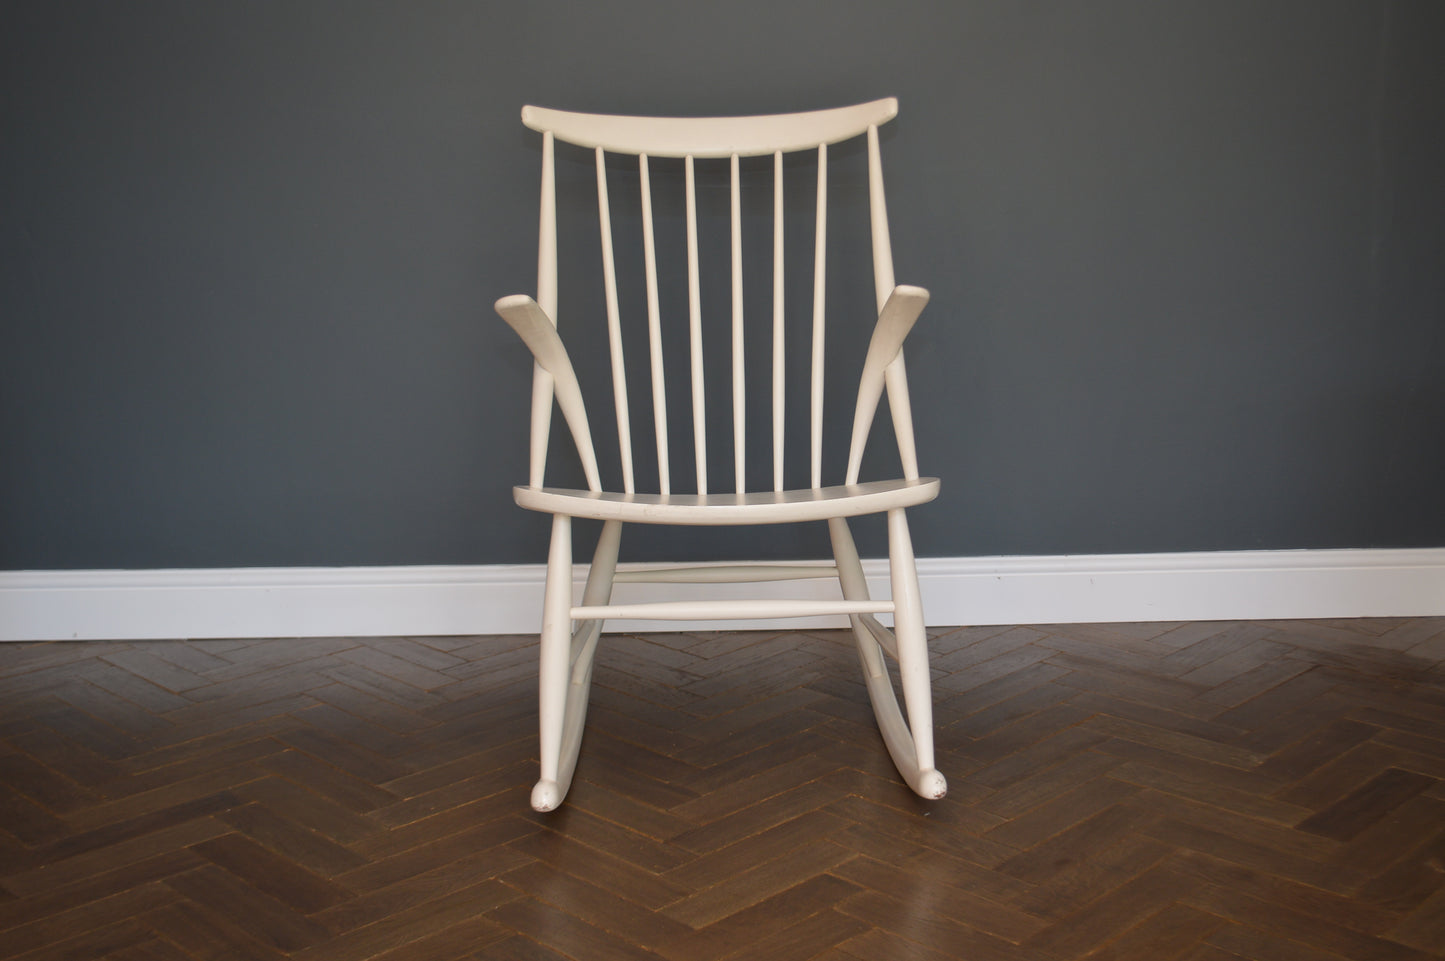 Vintage Danish Rocking Chair By Illum Wikkelso In White, 1960s.